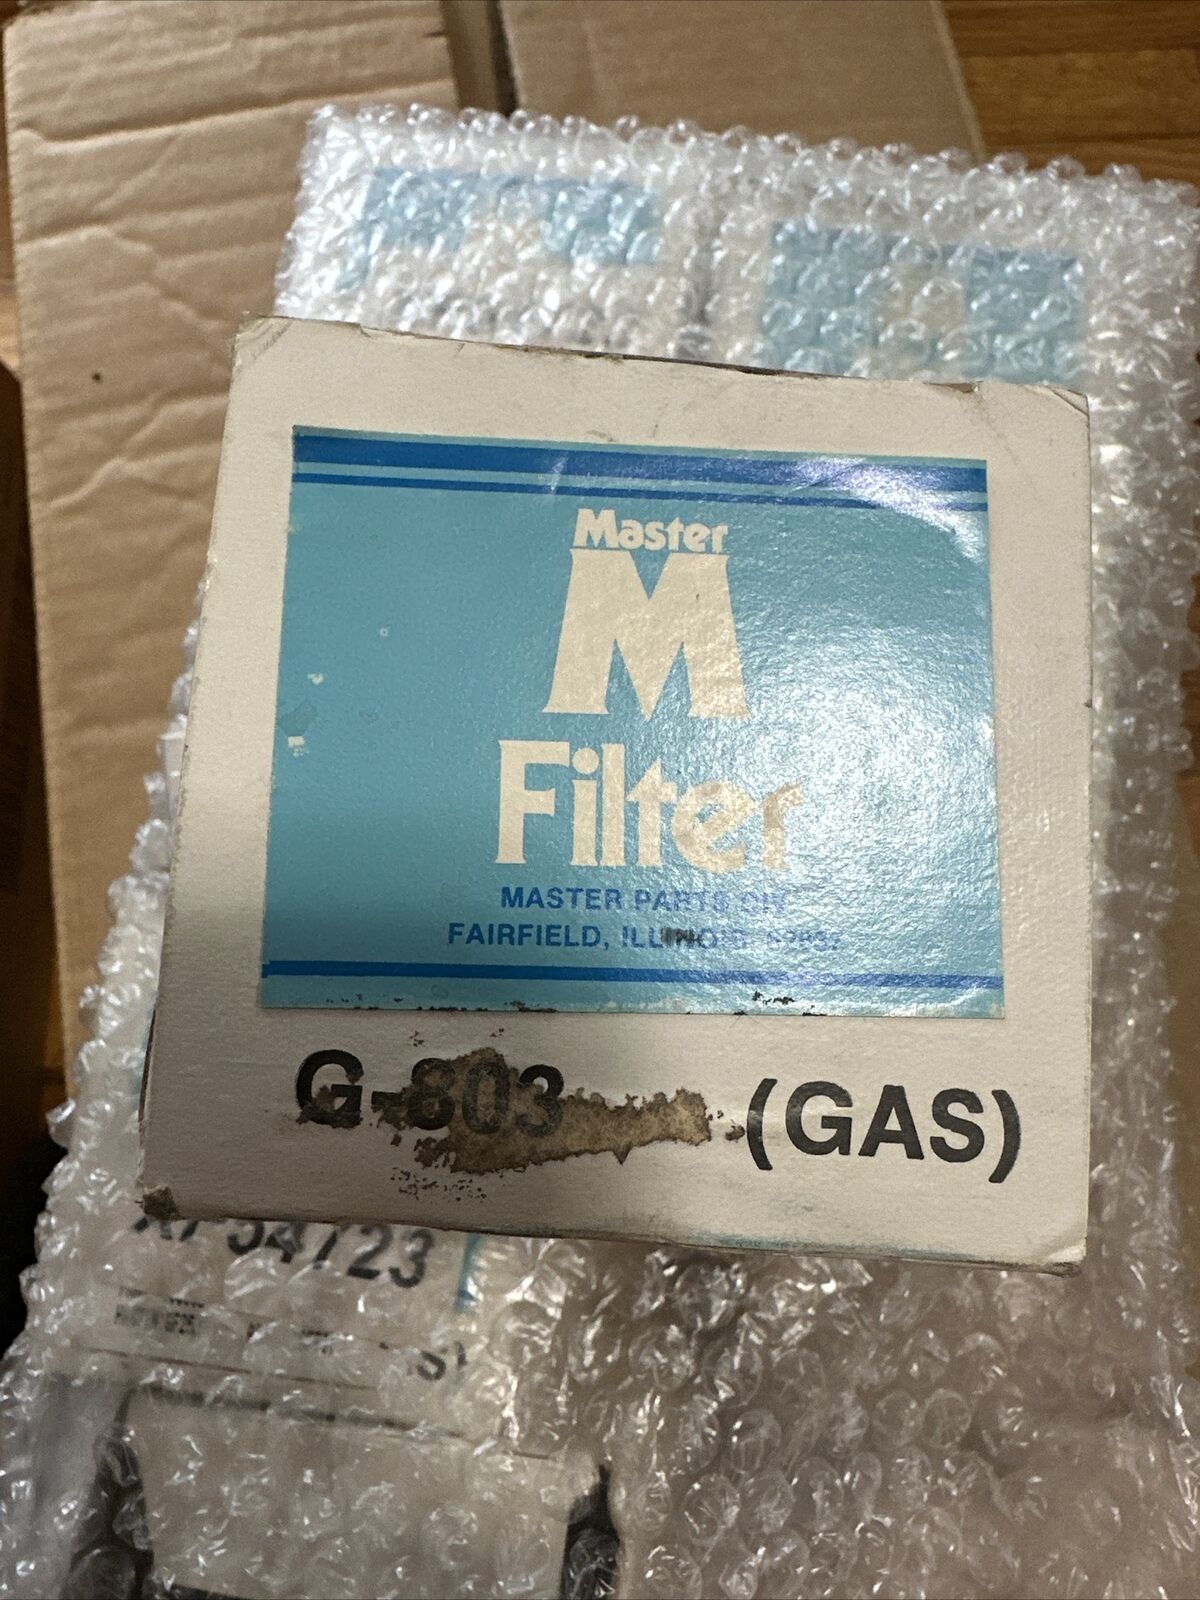 Master Parts Filter Lot G-803, XF54723 New Old Stock